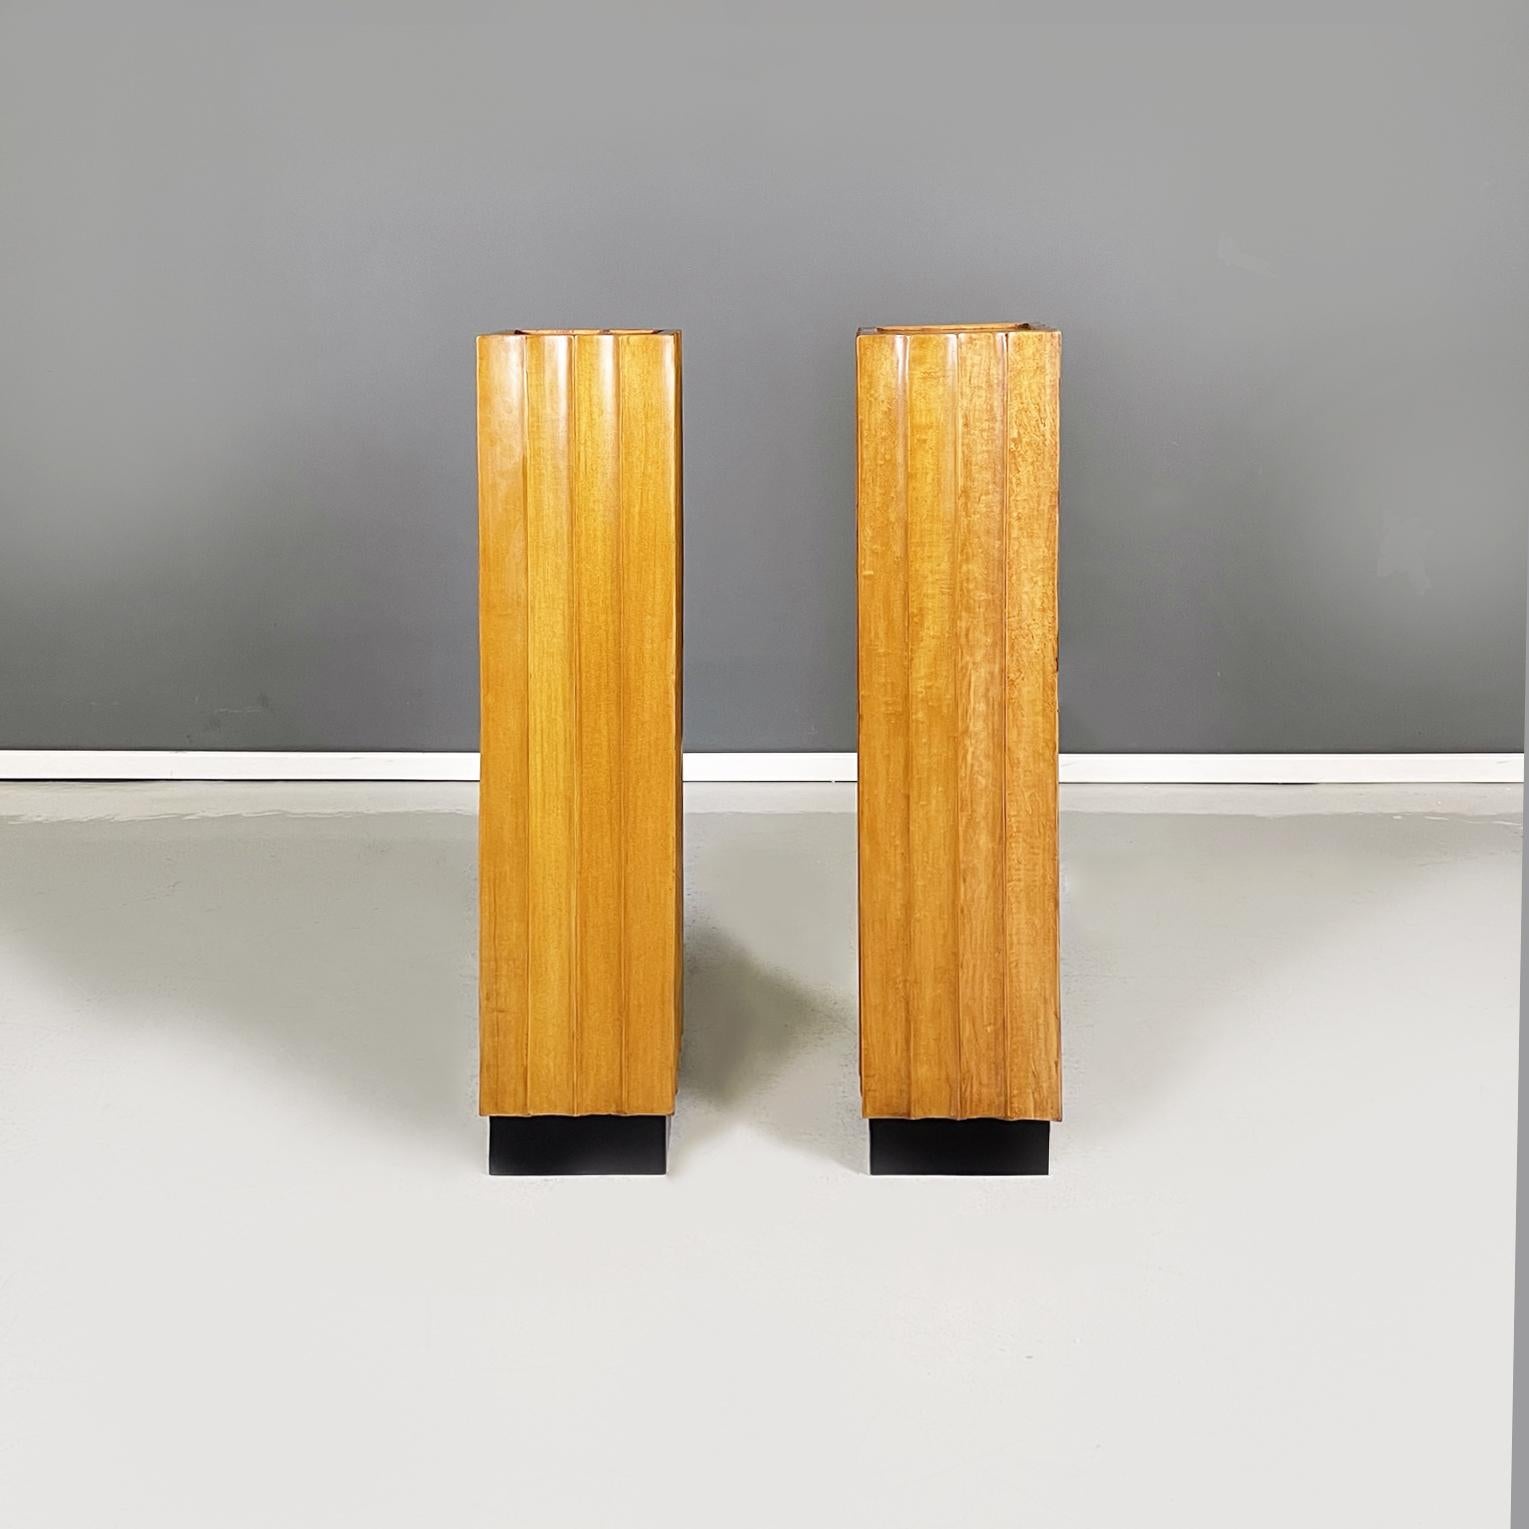 Mid-Century Modern Italian Midcentury Black Light Wooden Square Pedestals with Wavy Profile, 1960s For Sale